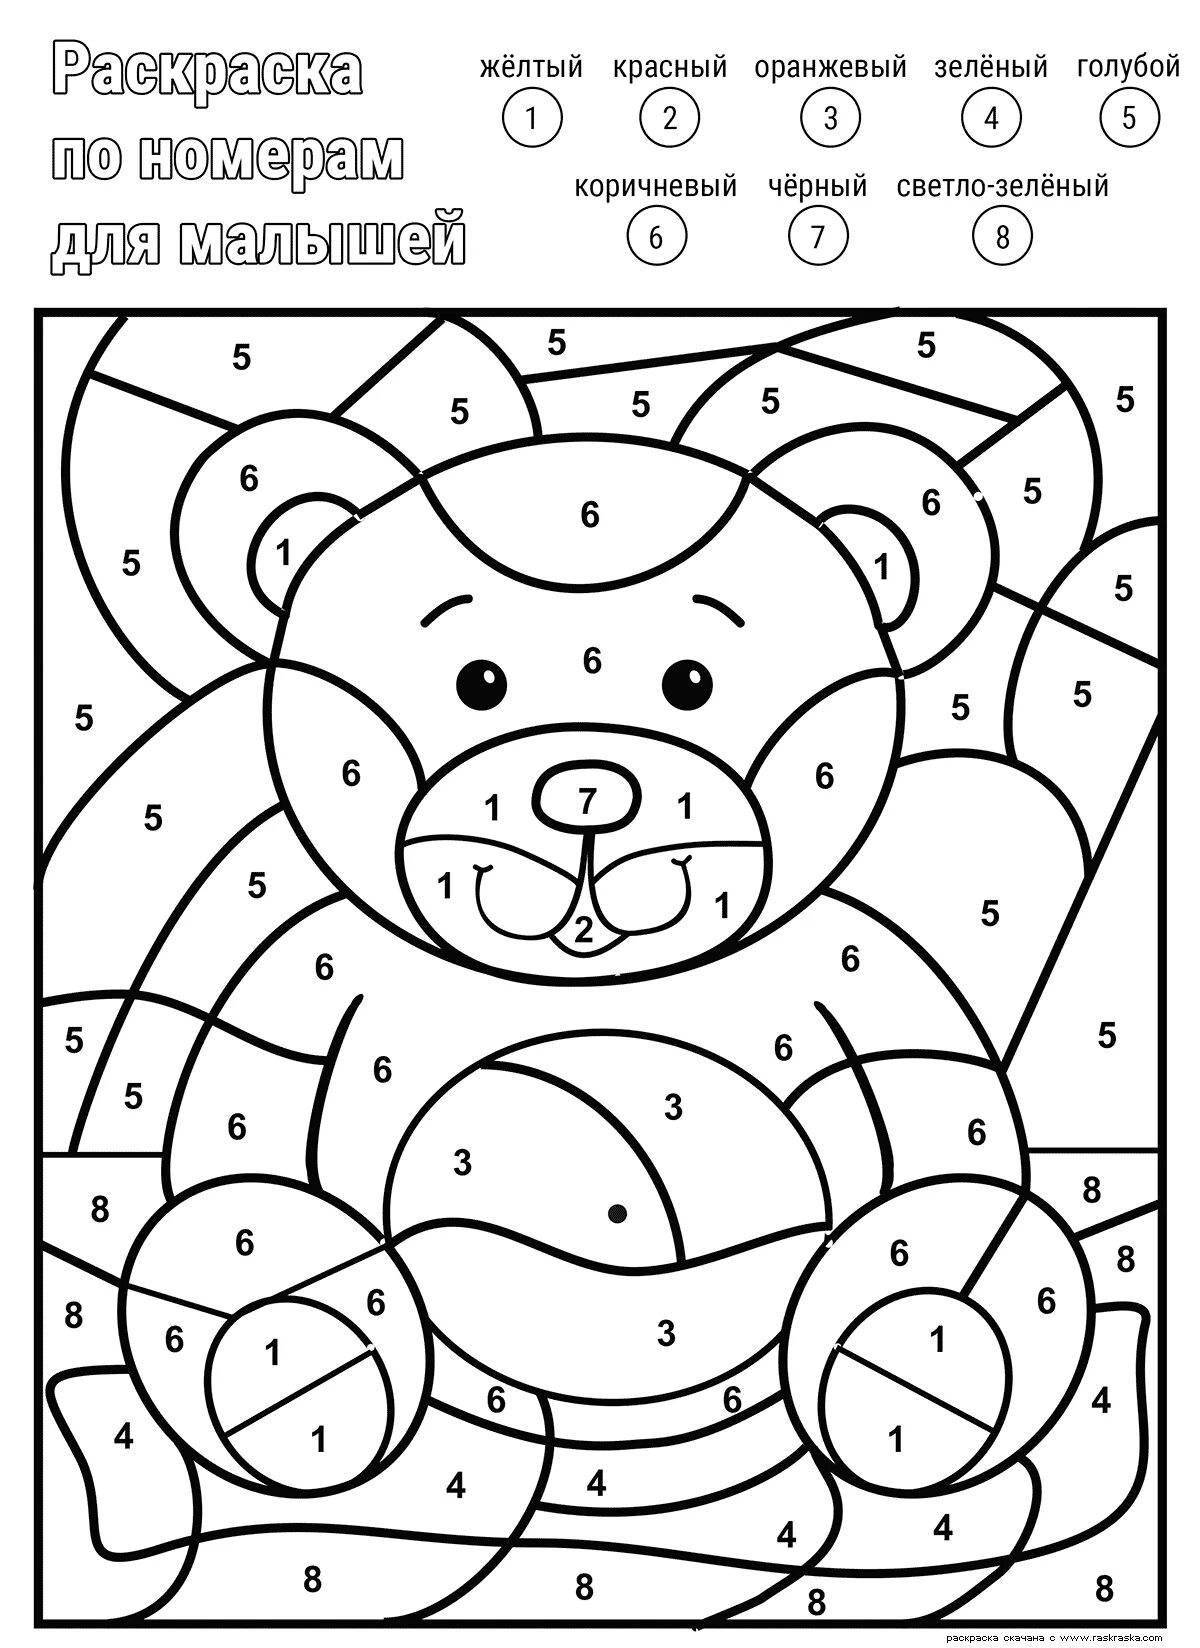 Exciting number coloring pages for kids